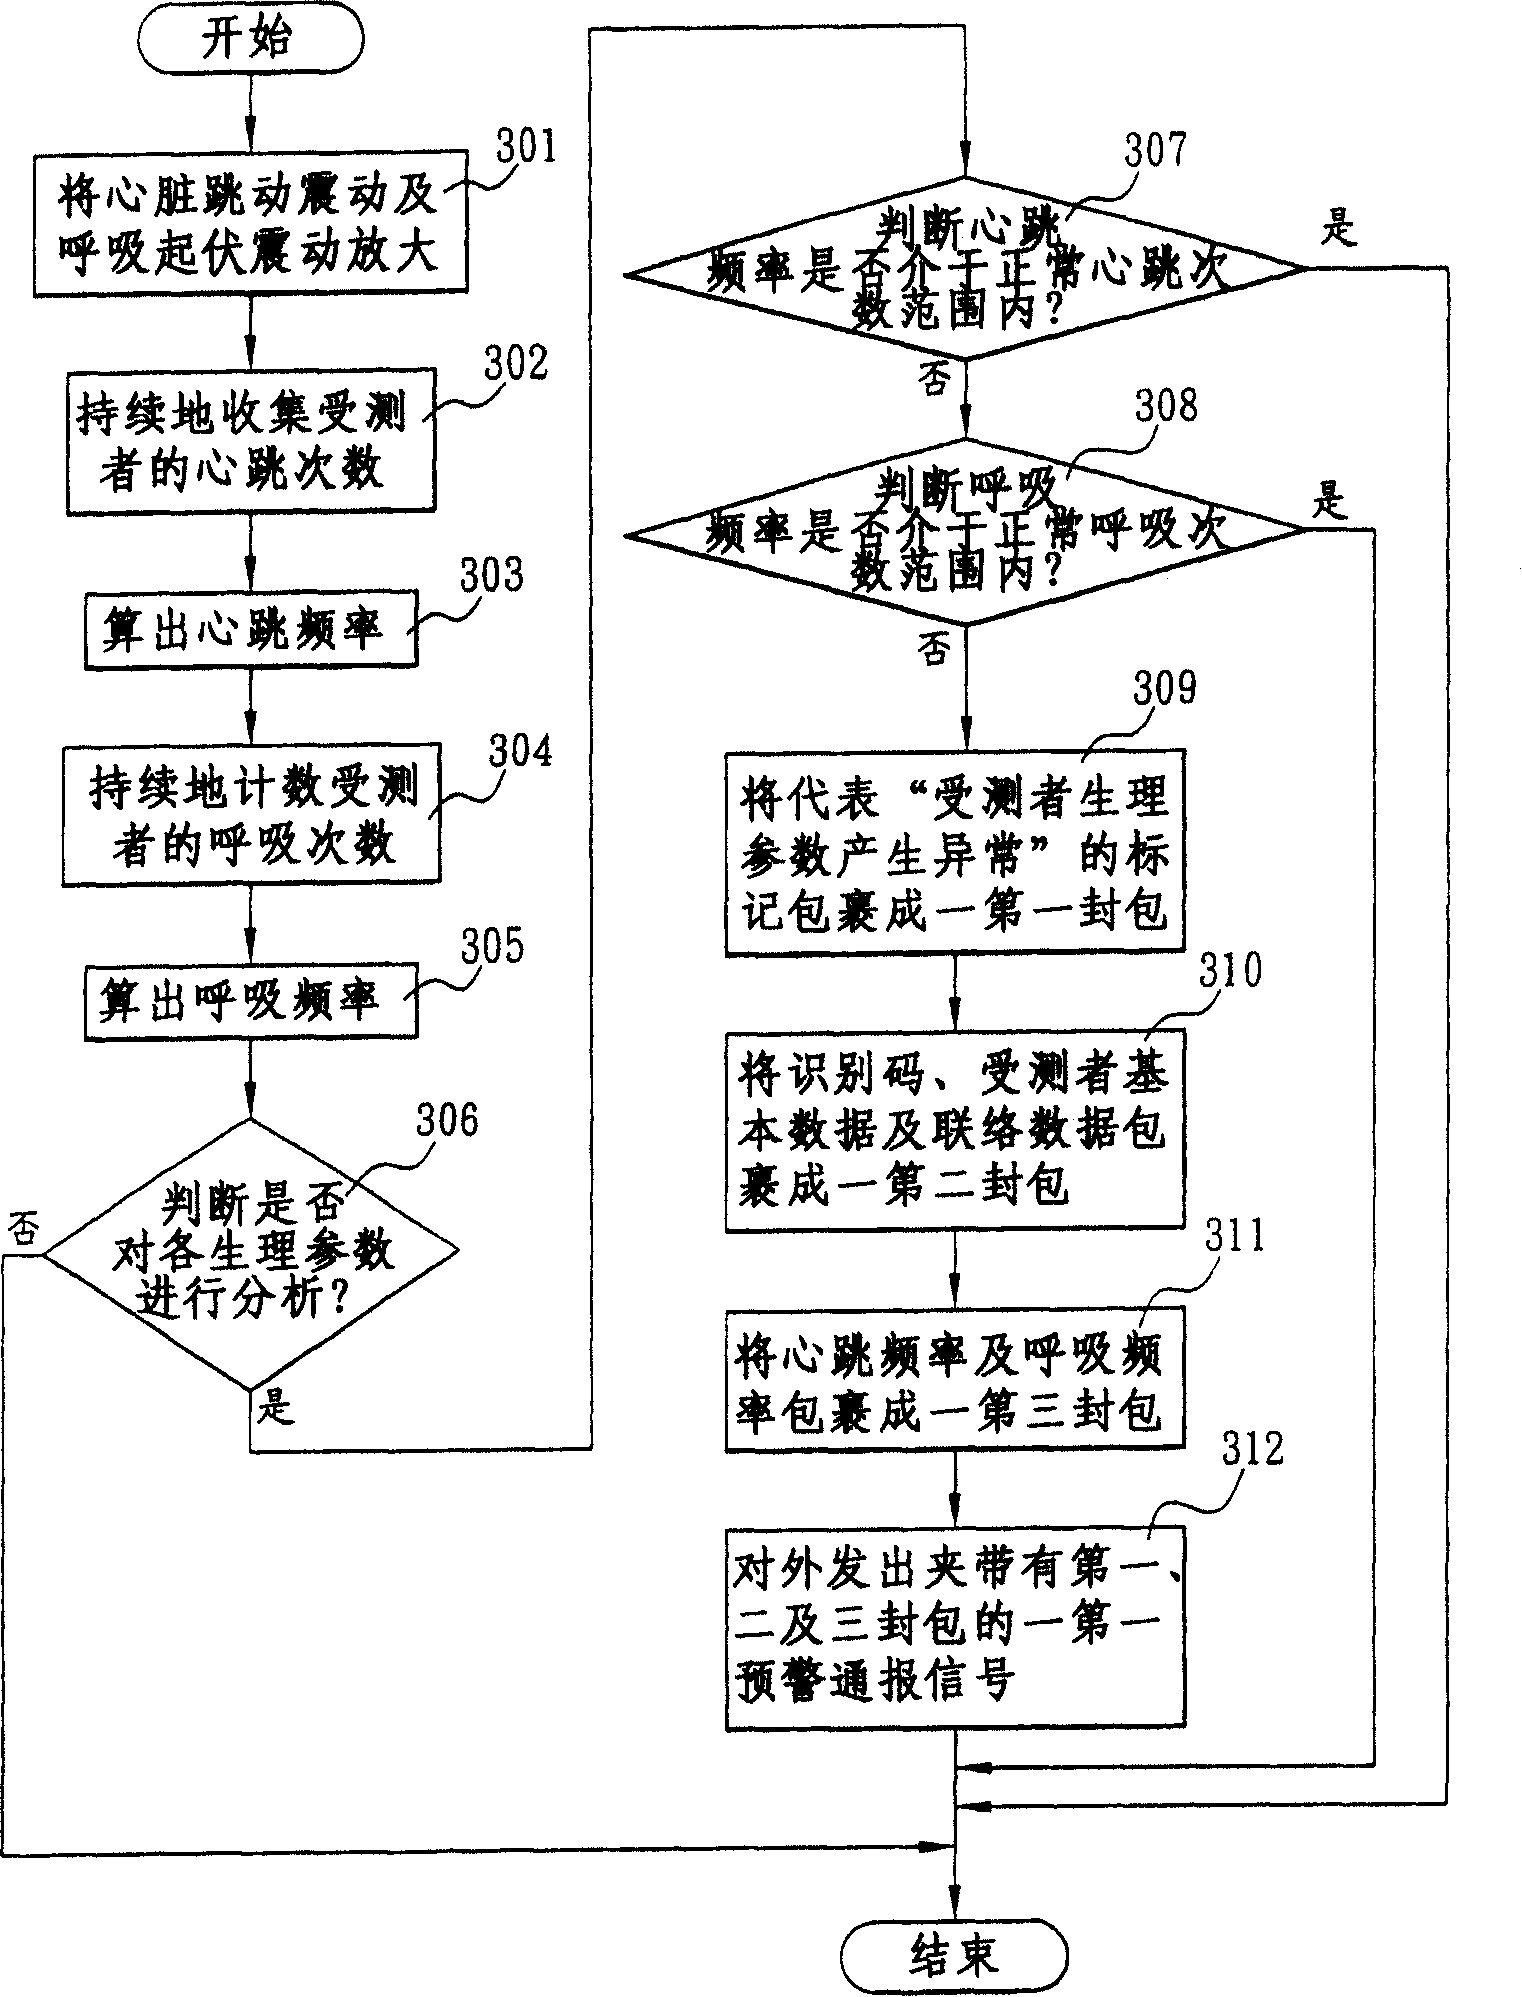 Method for carry-on monitoring human physiological parameter and safety state